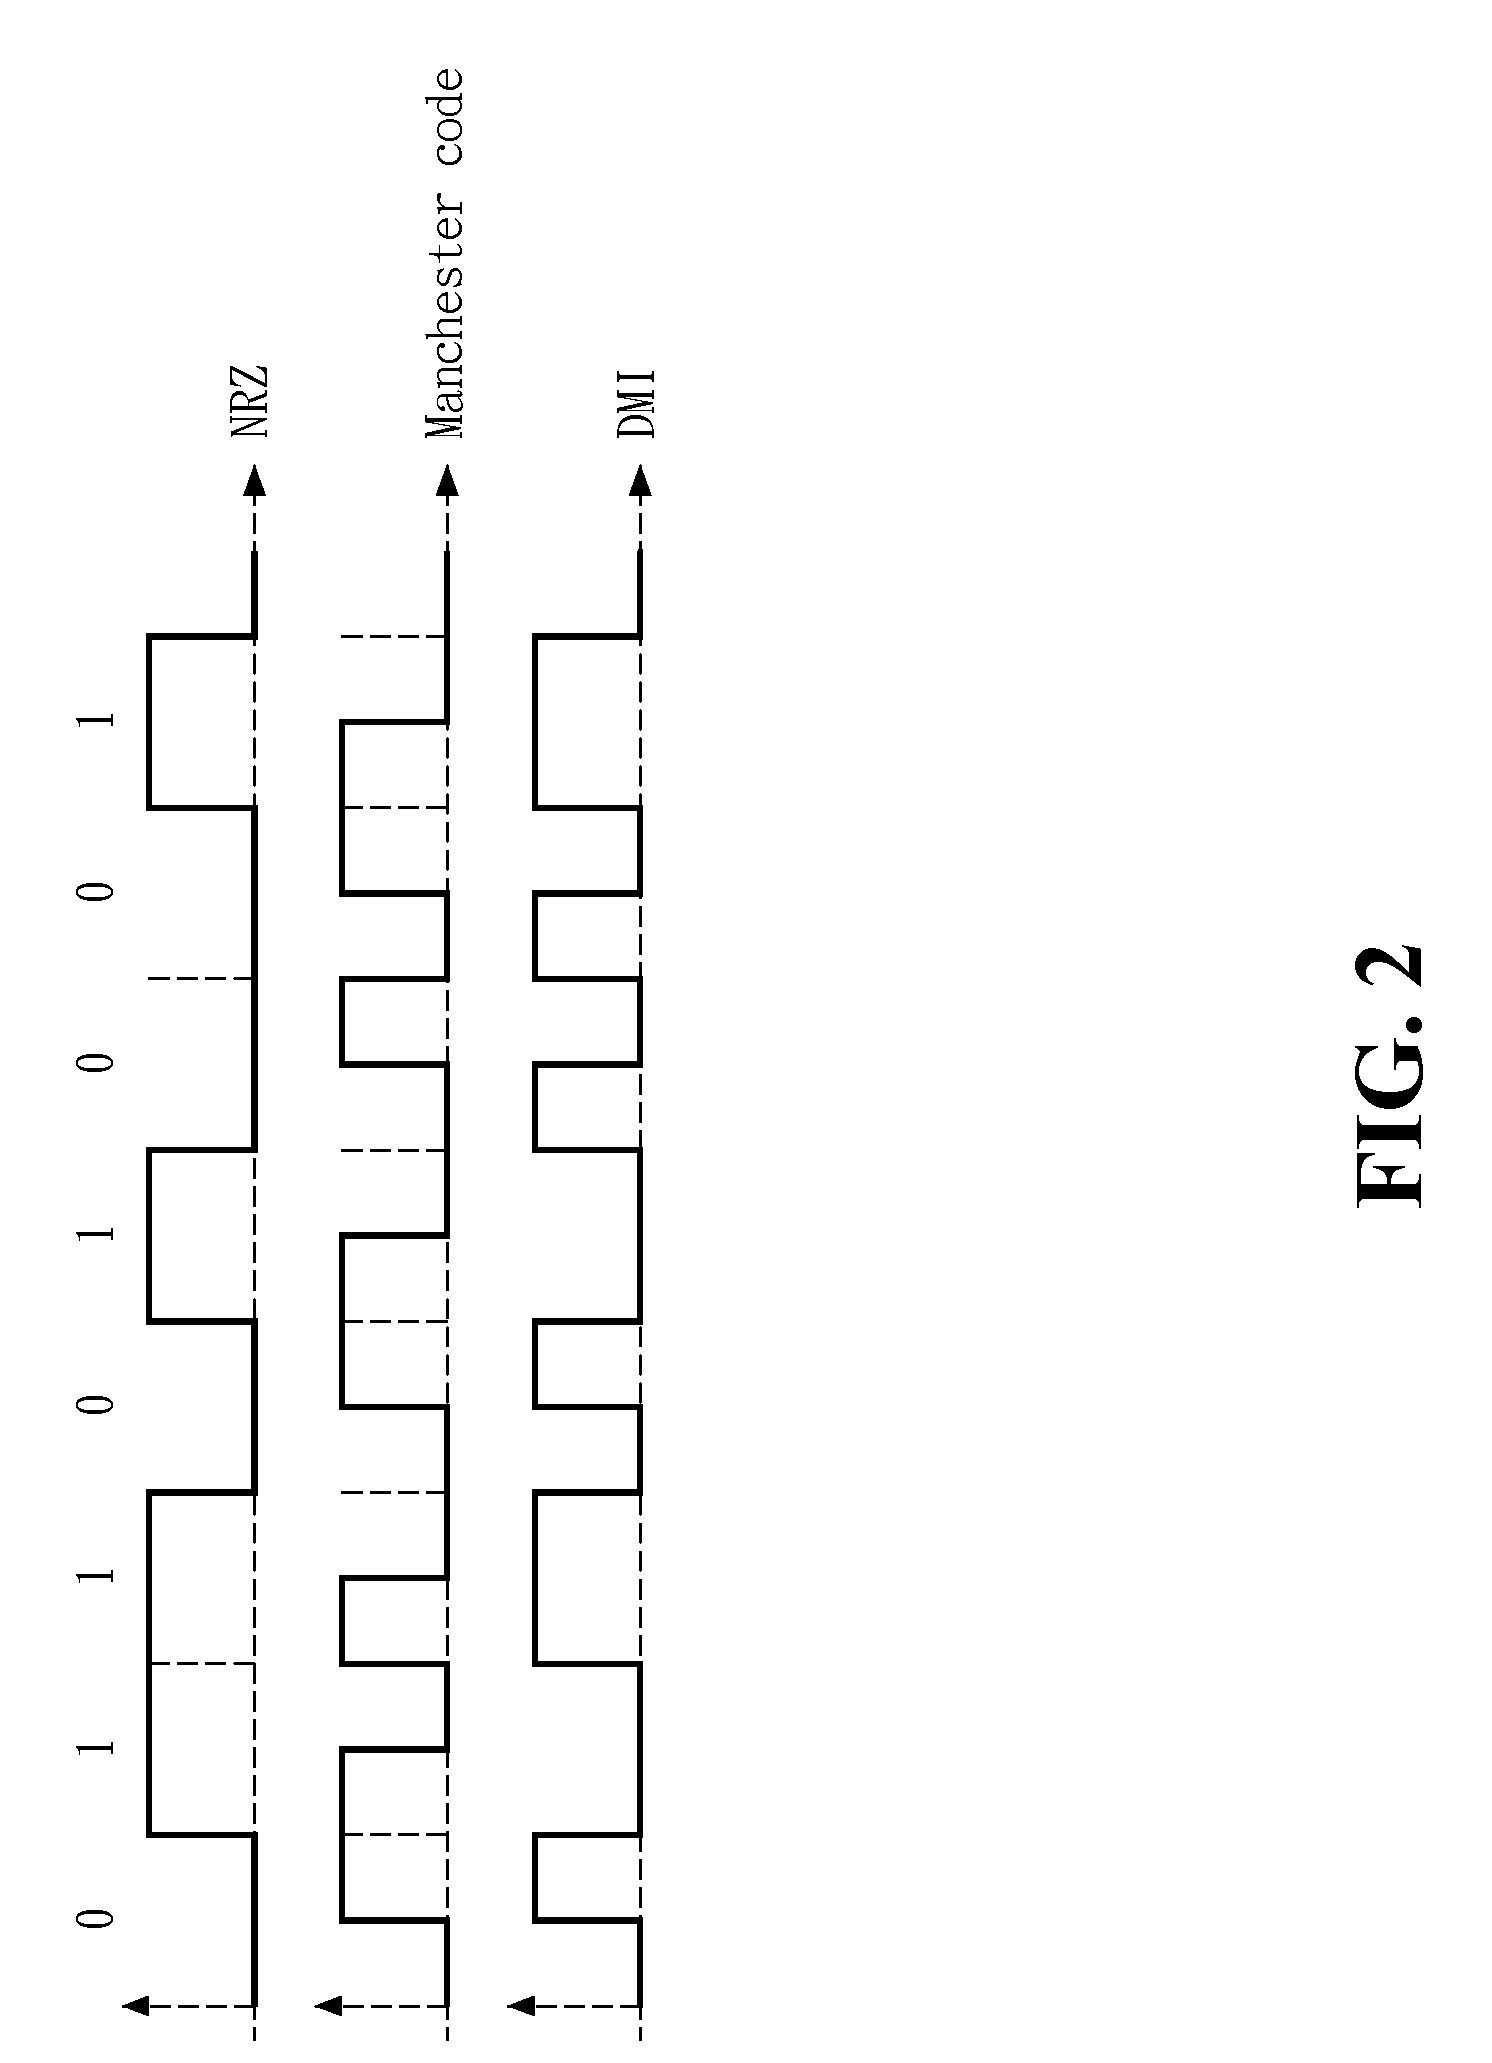 Interference-Rejection Coding Method For An Optical Wireless Communication System And The Optical Wireless Communication System Thereof